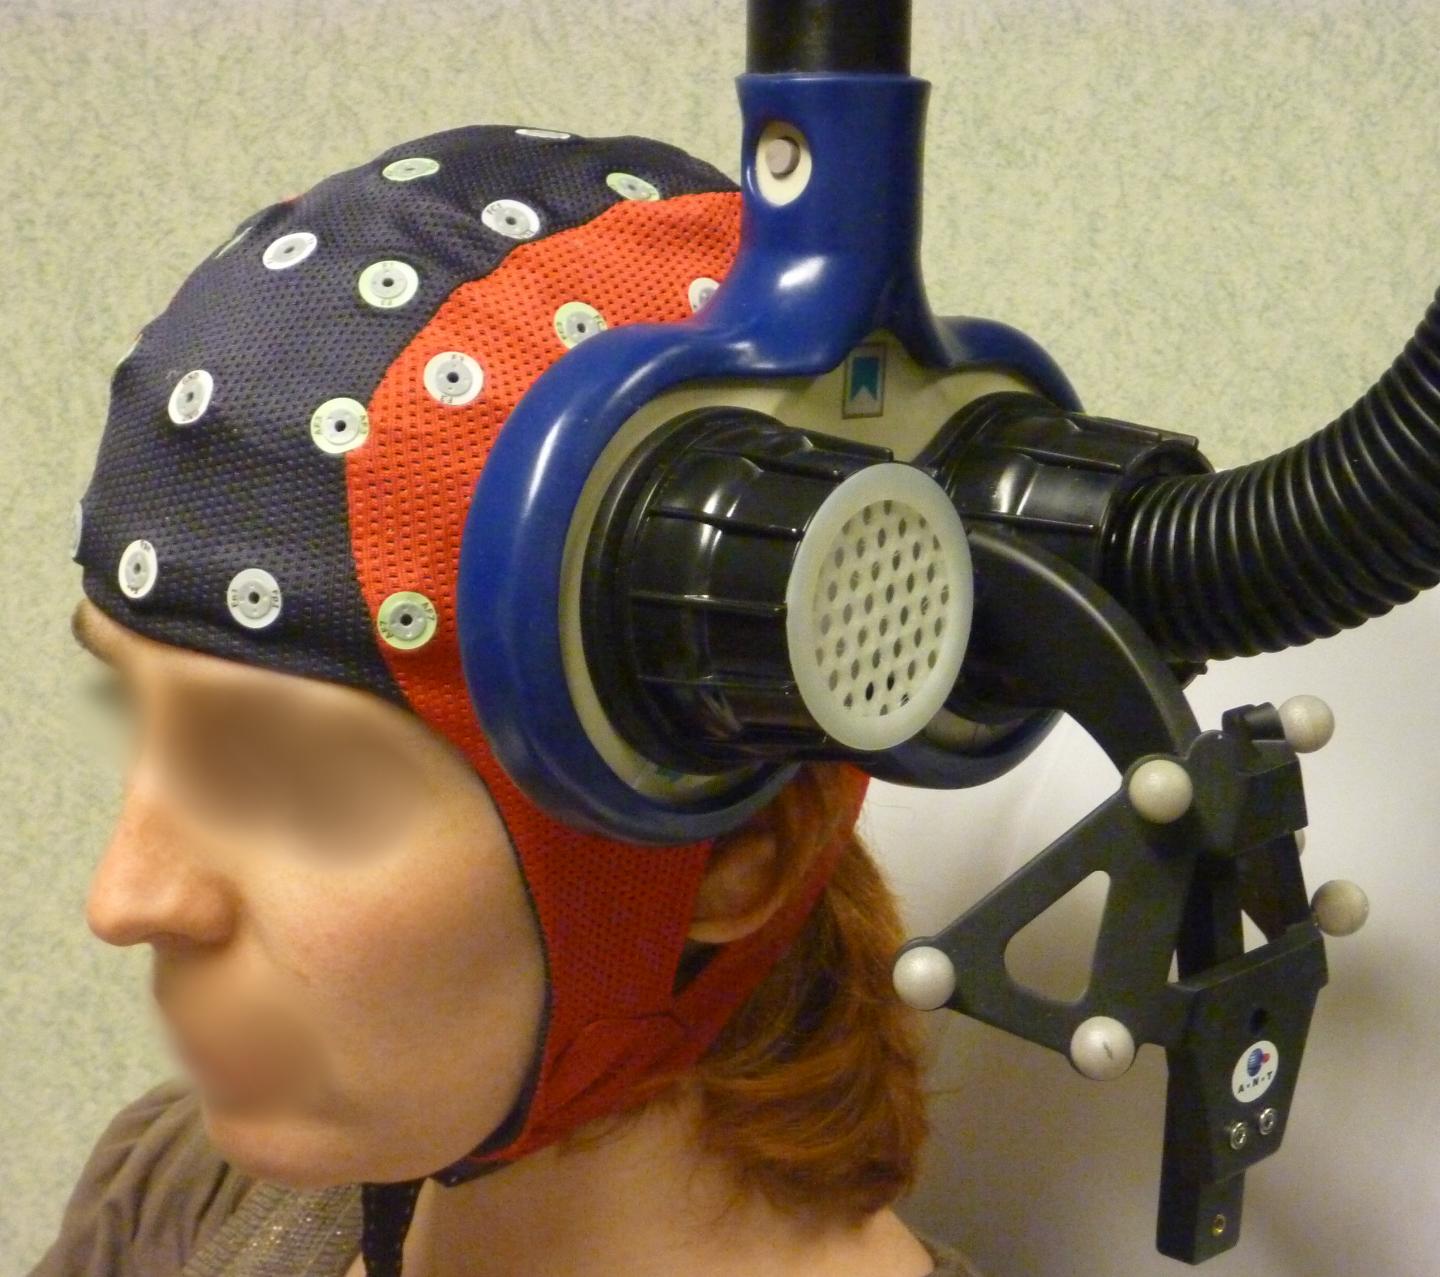 Magnetic Stimulation Applied on Localized Brain Area in Real Time